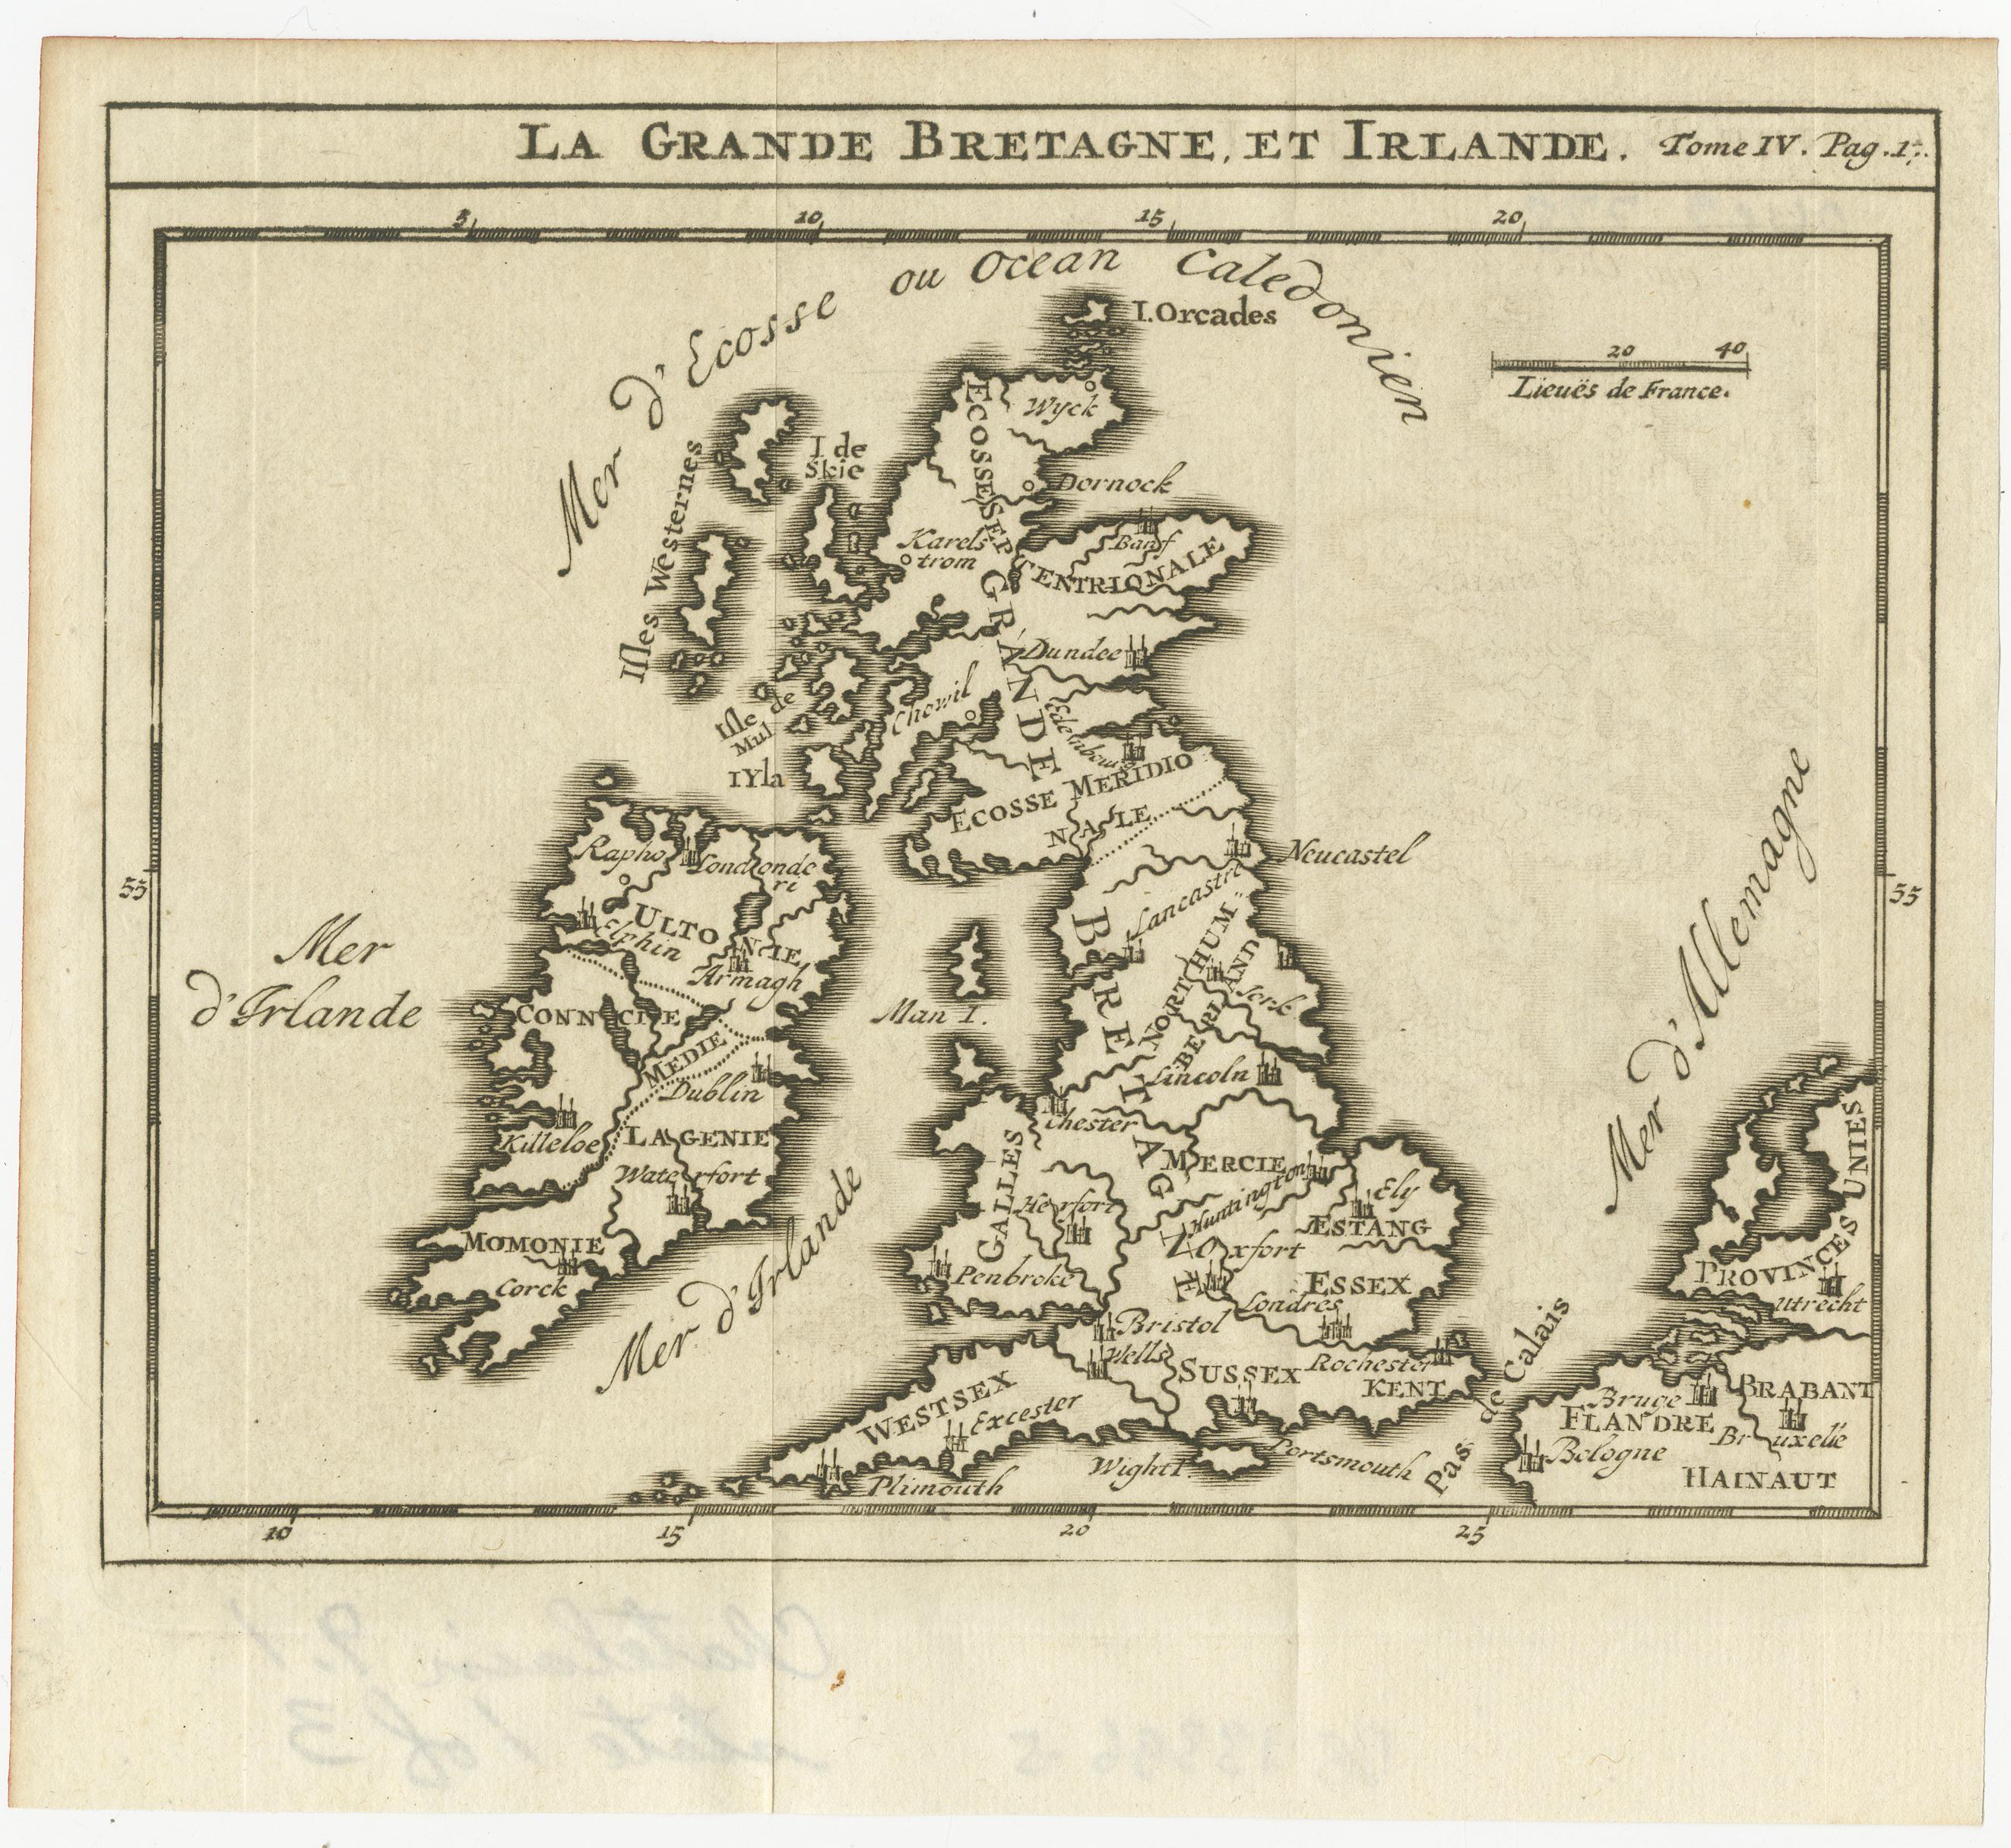 Antique map titled 'La Grande Bretagne et Irlande'. Small antique map of Great Britain and Ireland. Source unknown, to be determined. Published circa 1740.